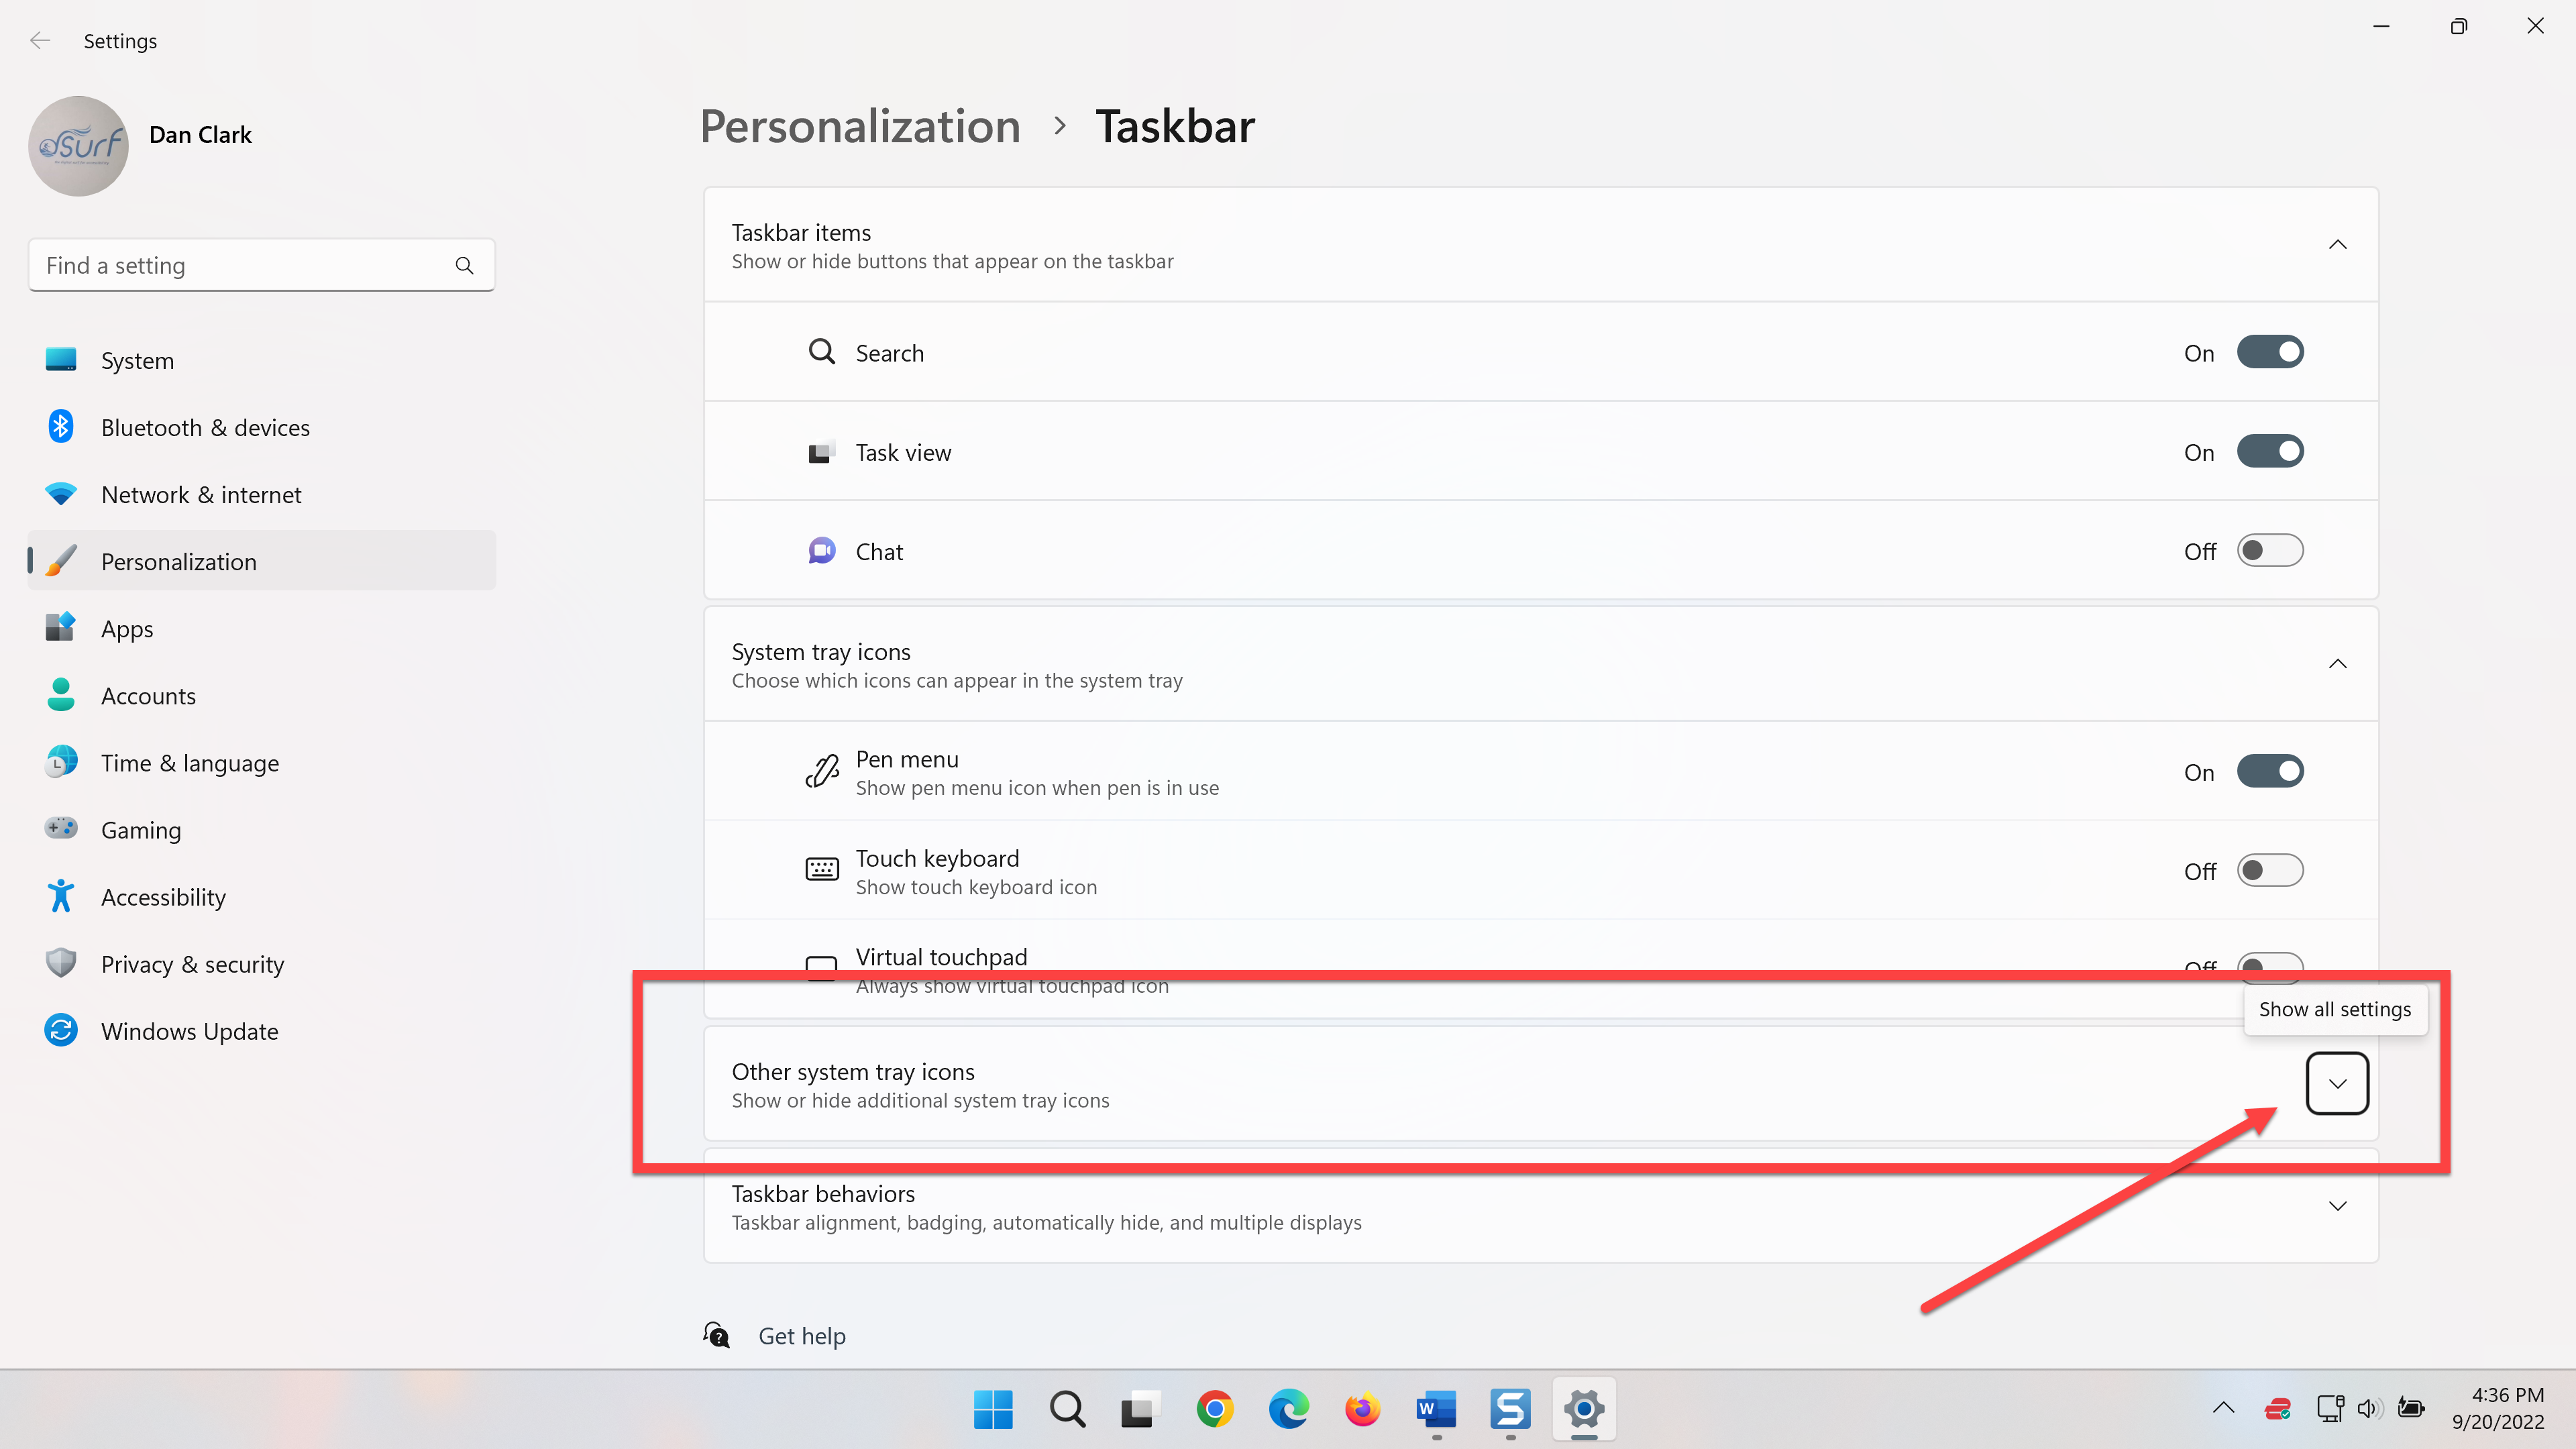 Personalization - Taskbar settings, showing the Show all settings button collapsed.